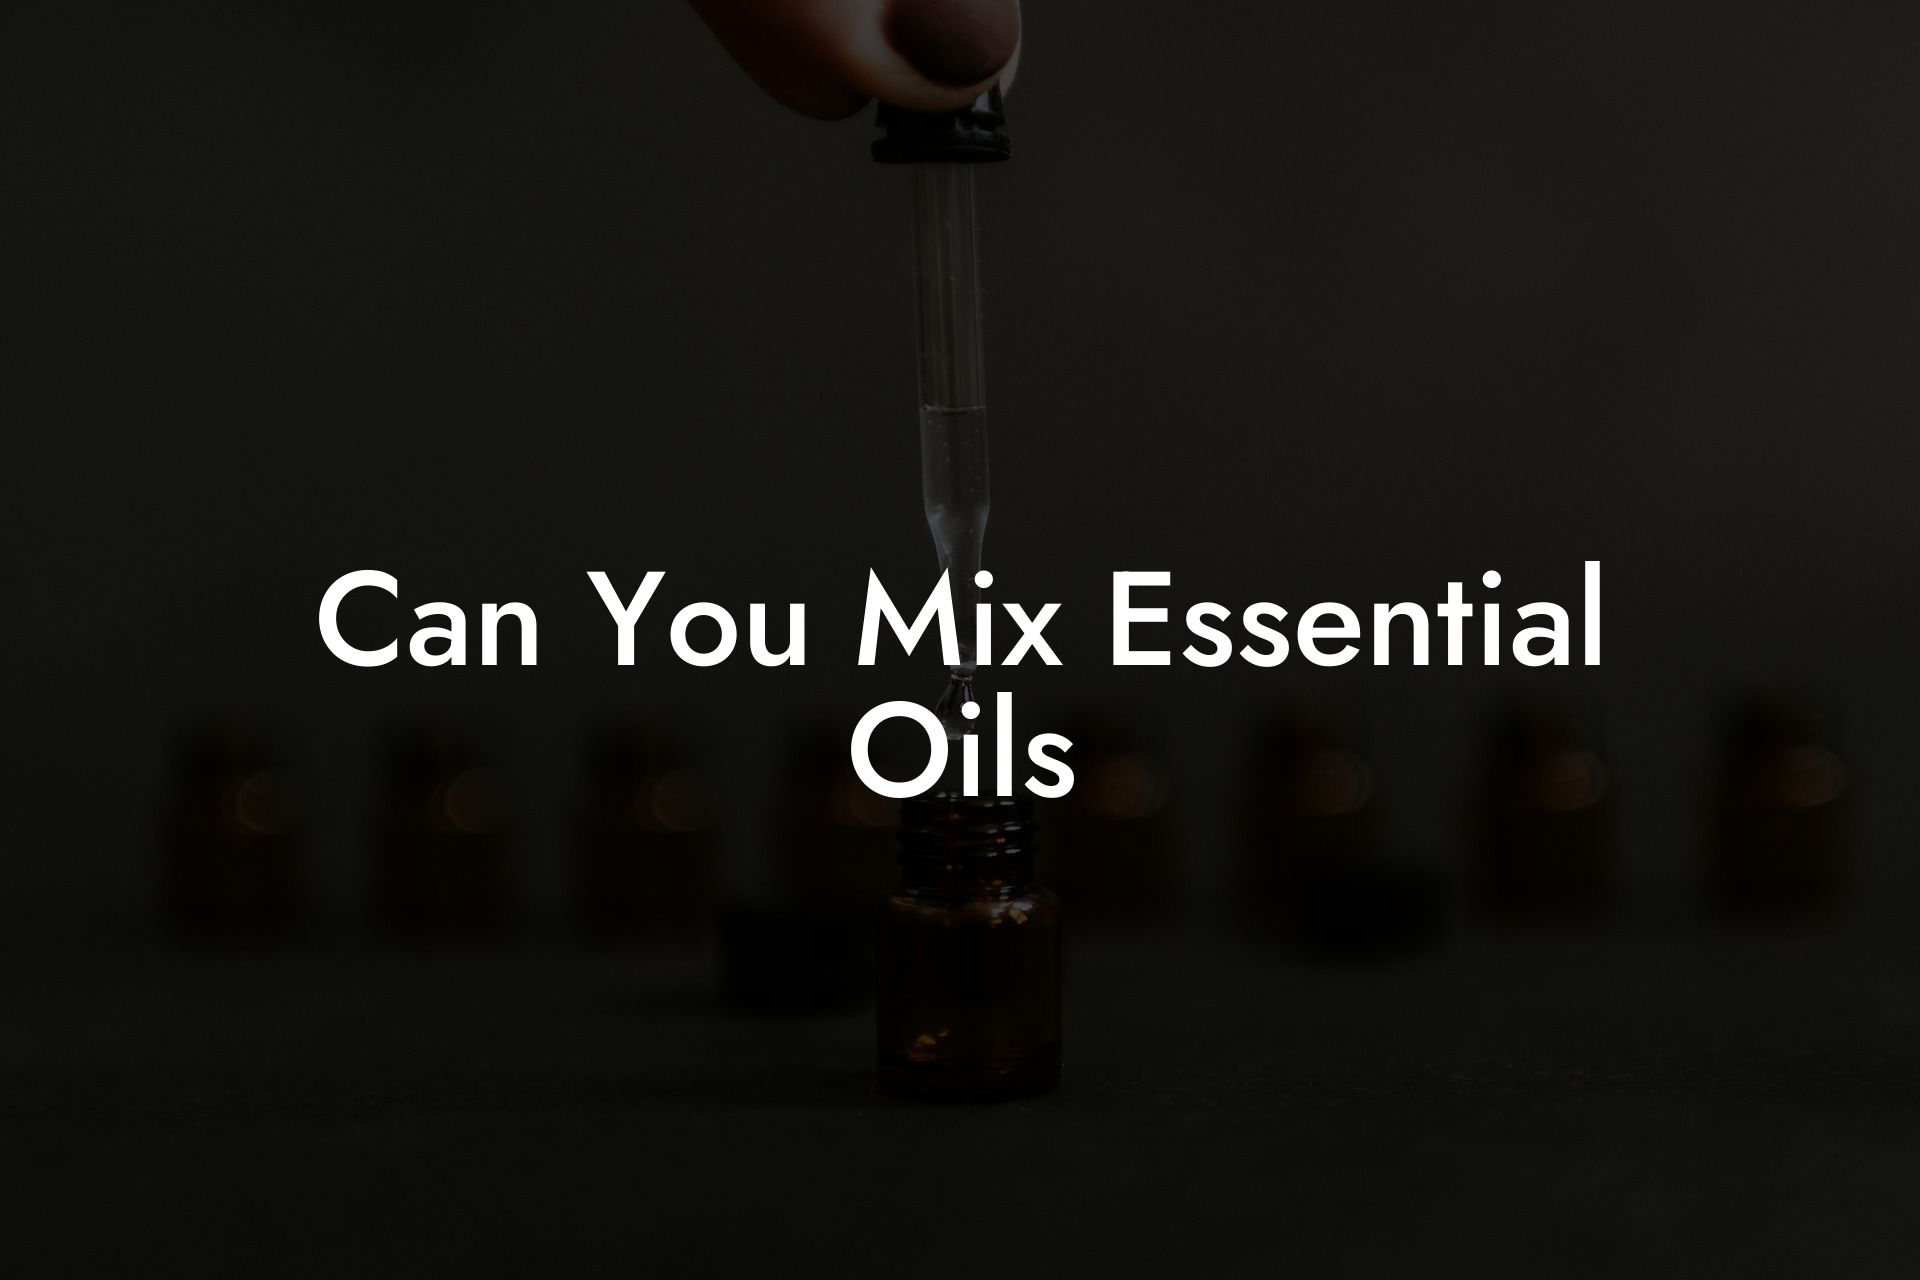 Can You Mix Essential Oils